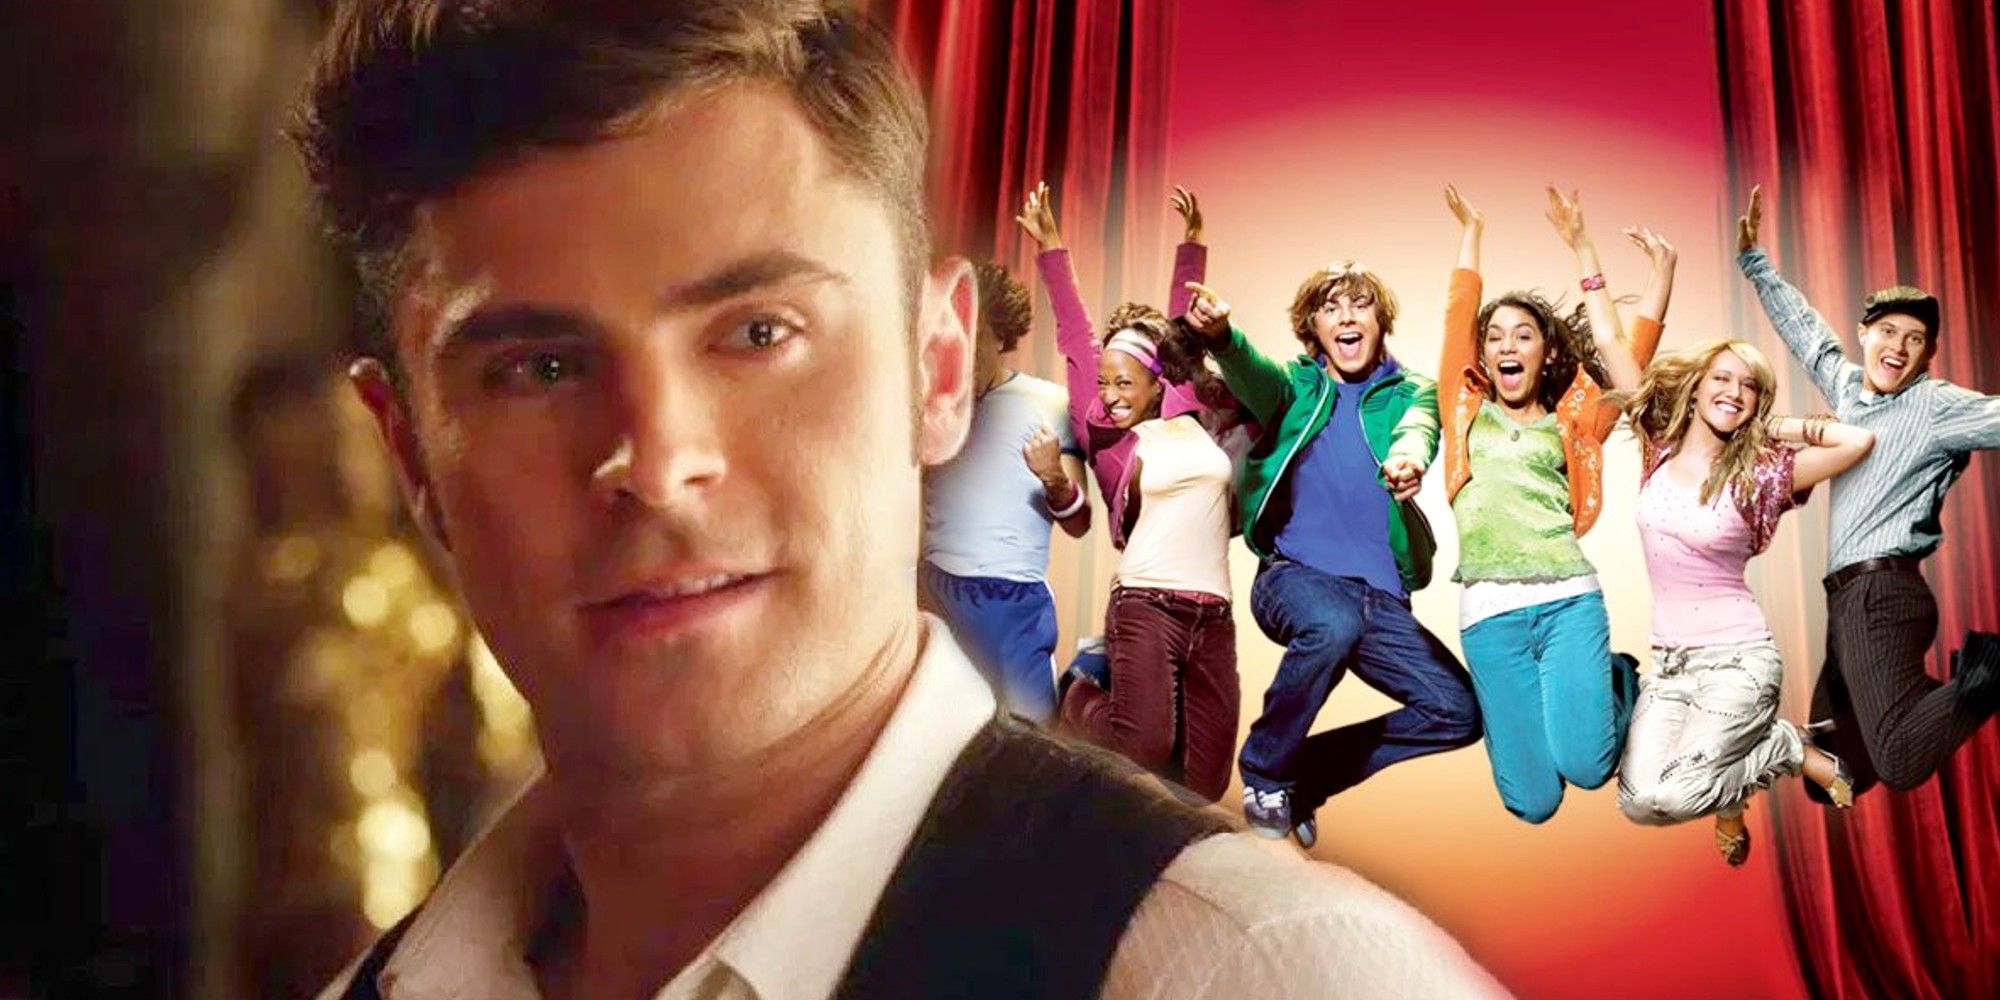 Zac Efron returns to his 'High School Musical' roots in new photo